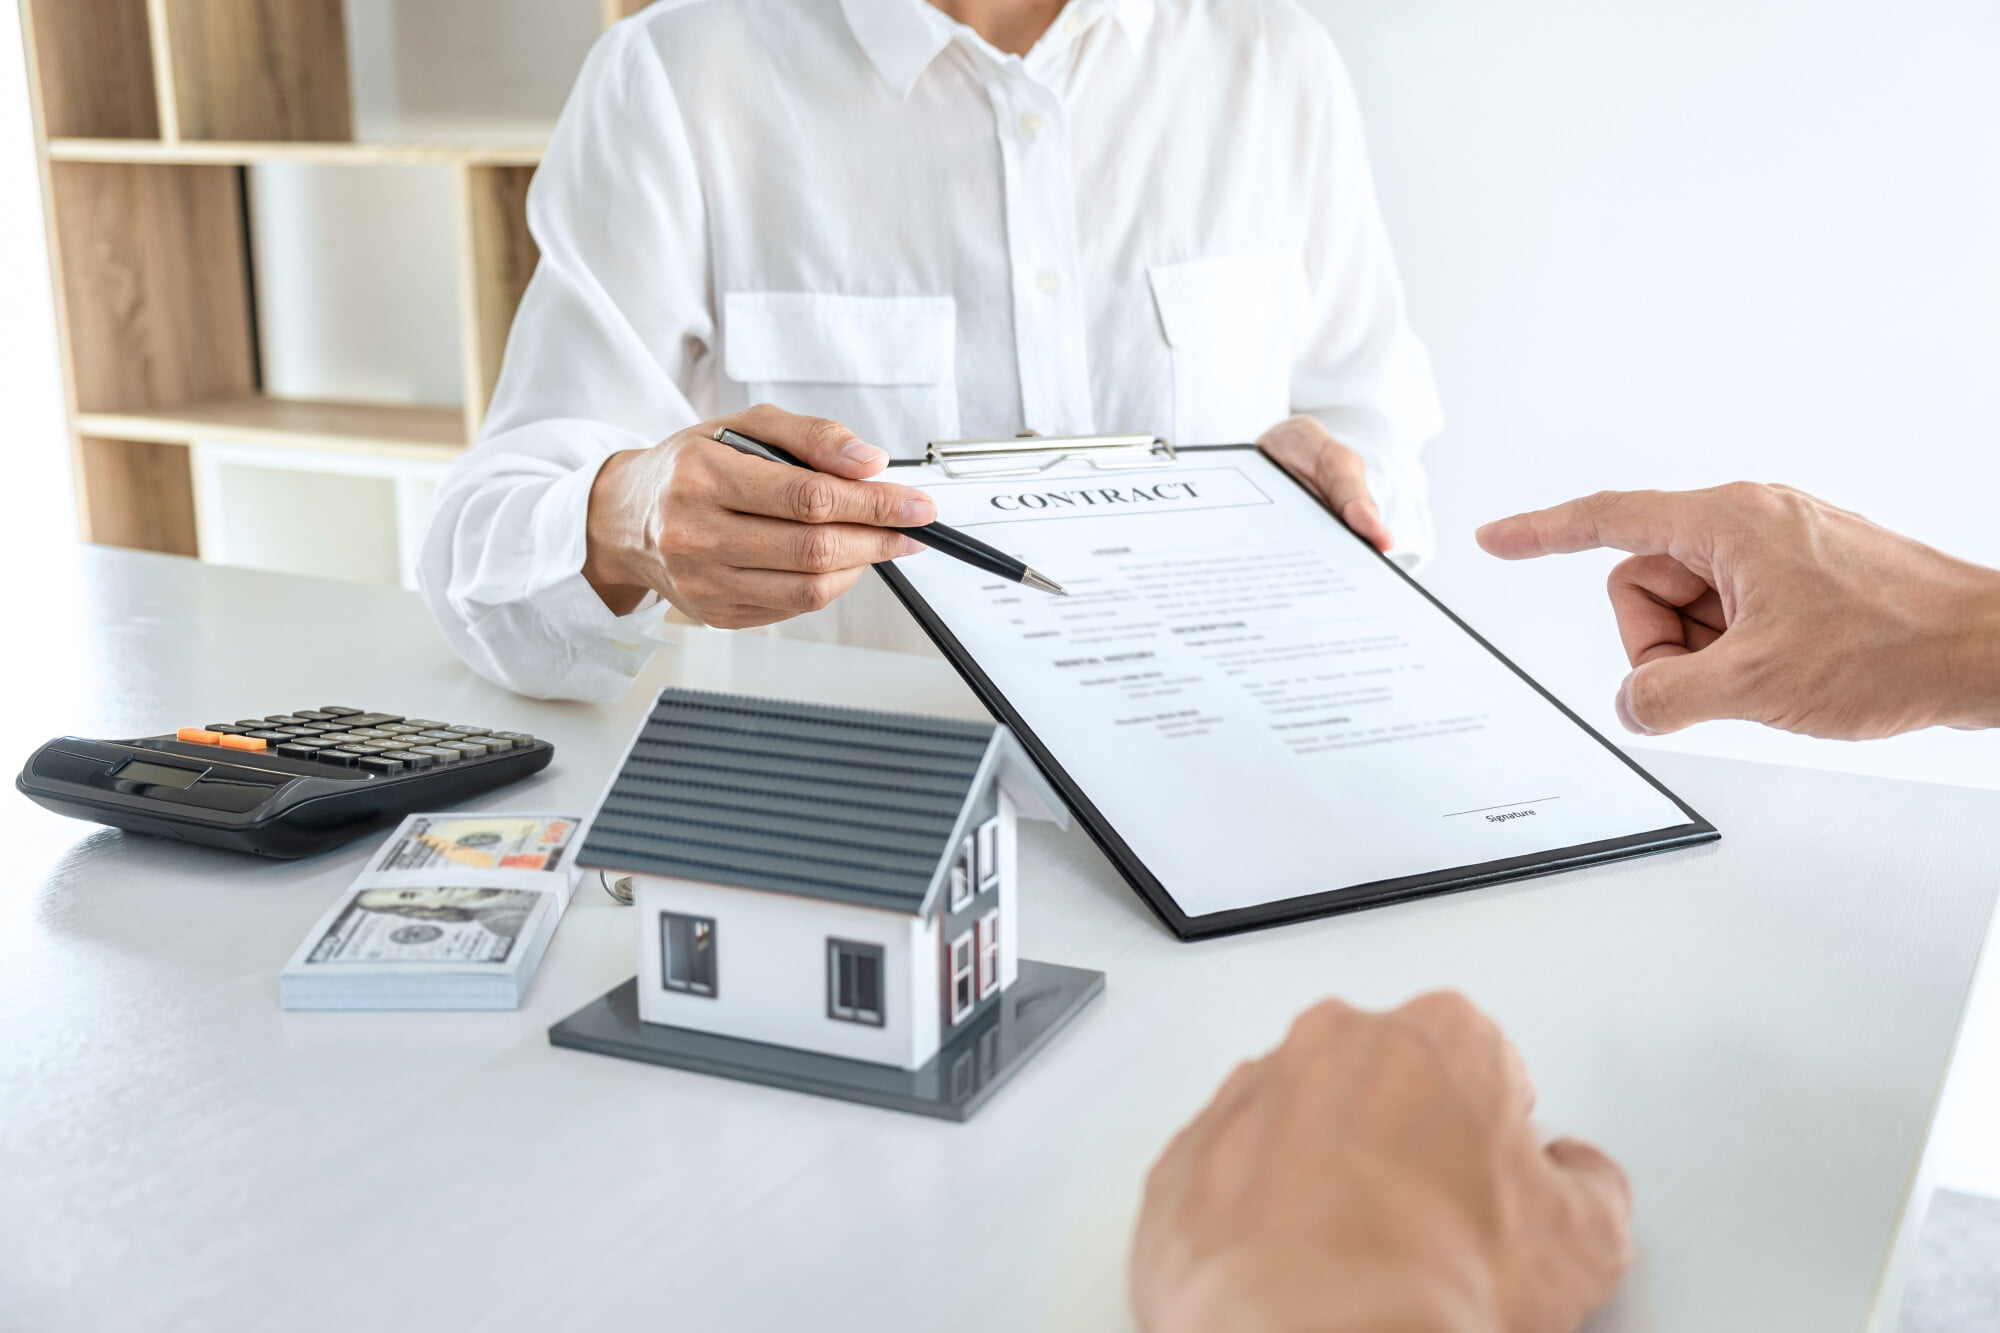 Buying a rental property can be a big opportunity... or a big hassle. Before diving into real estate investing, here are a few things to consider.